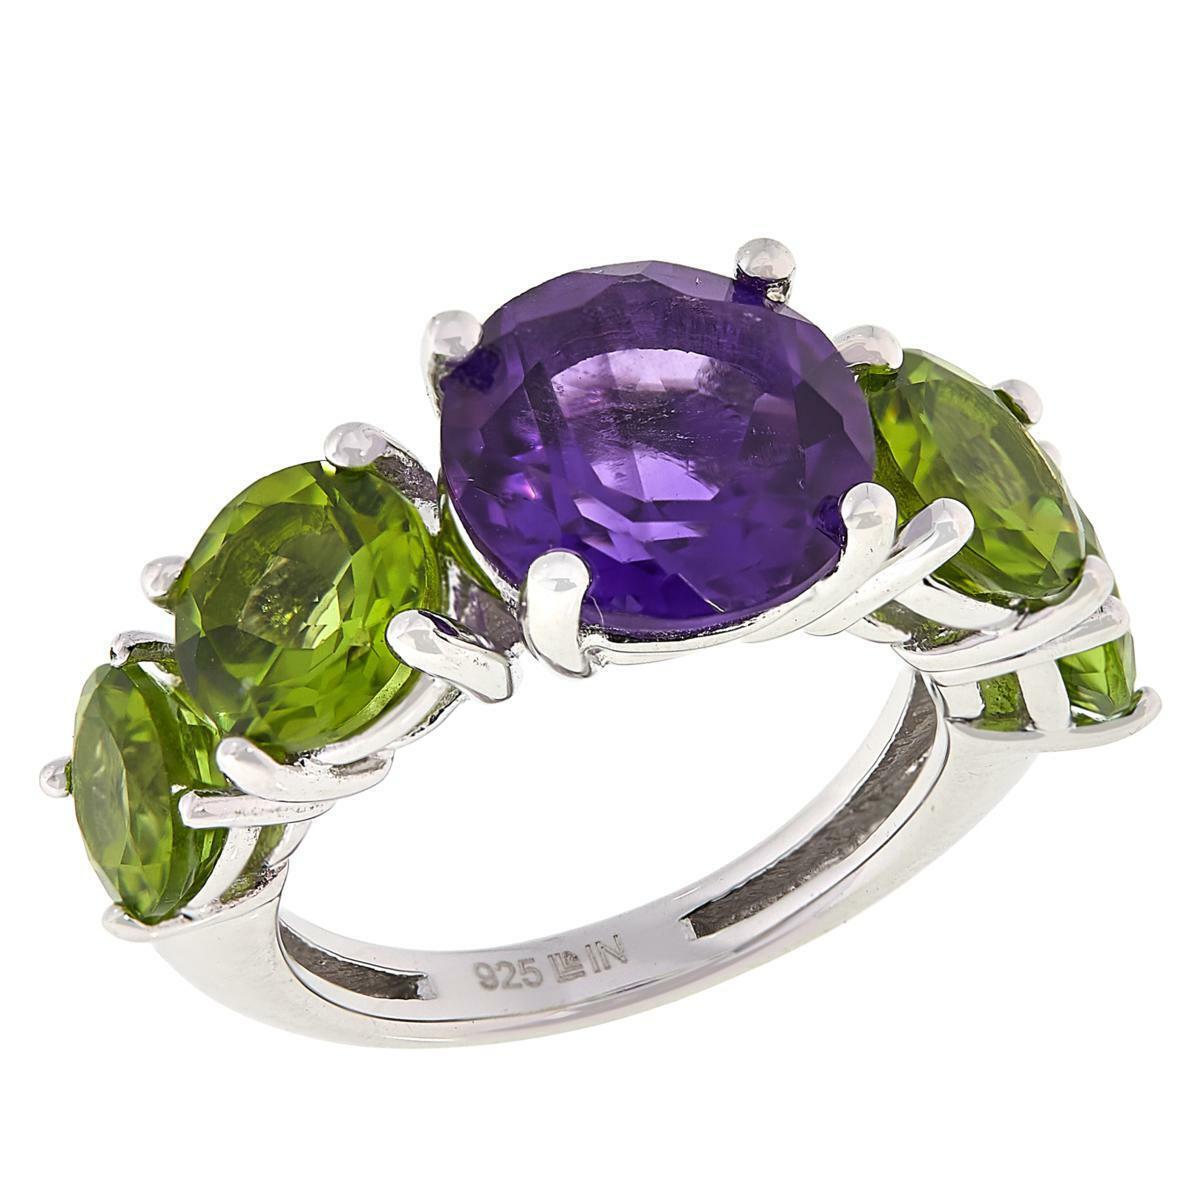 Colleen Lopez Sterling Silver African Amethyst & Peridot Ring, Size 5